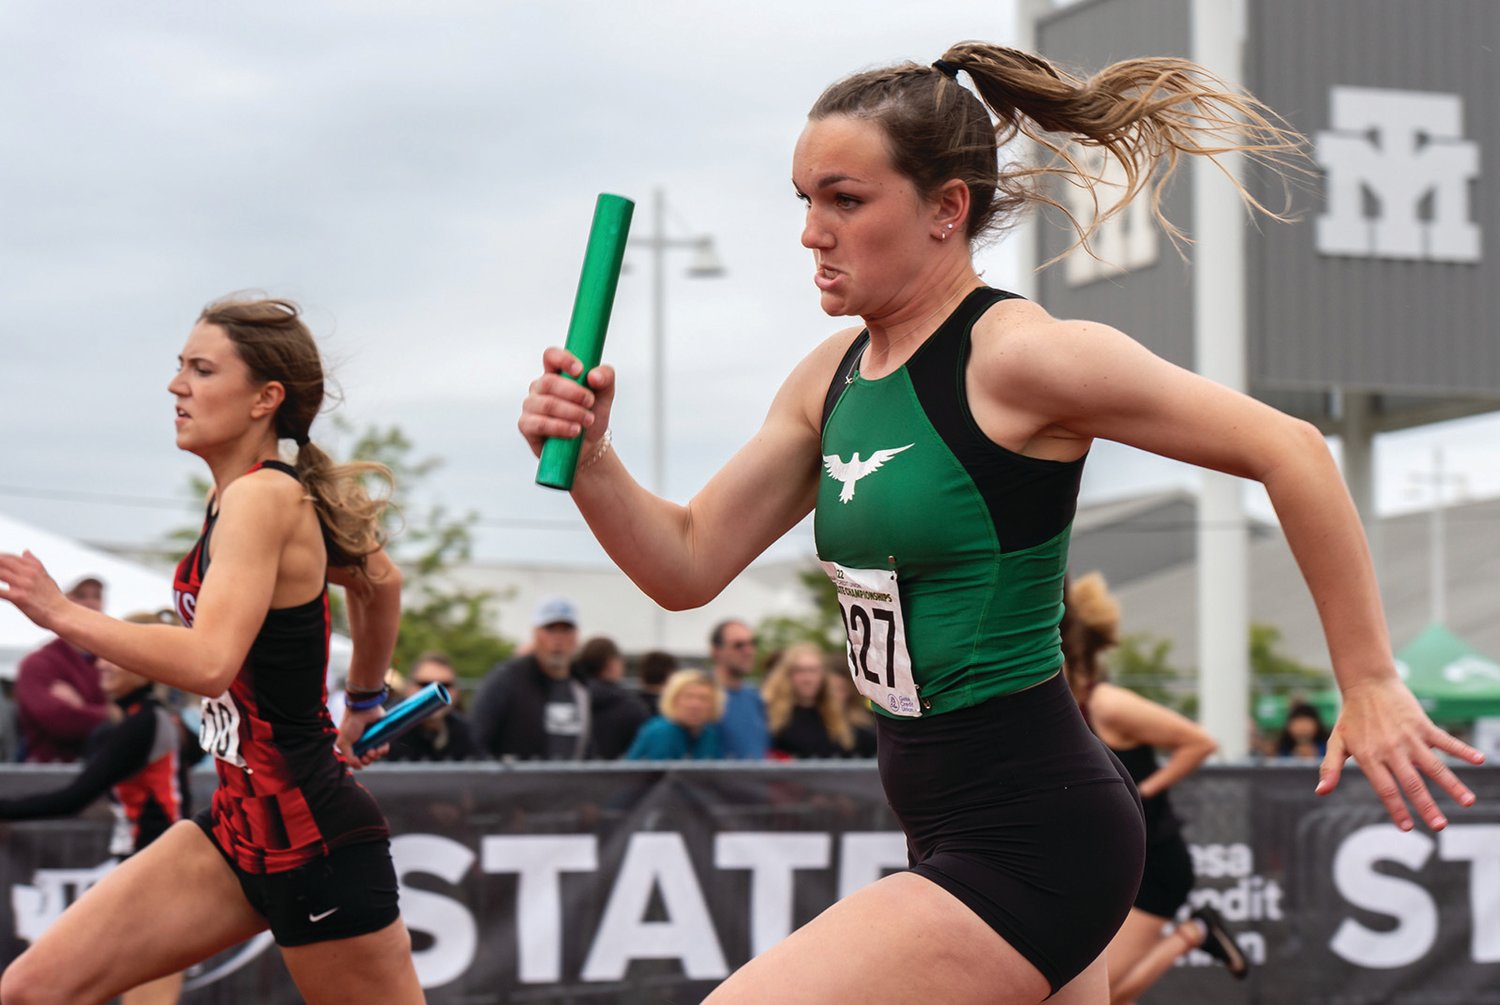 Tumwater's Mariah Jett runs the opening leg in the 2A Girls 4x200 preliminary at the 2A/3A/4A State Track and Field Championships on Thursday, May 26, 2022, at Mount Tahoma High School in Tacoma. (Joshua Hart/For The Chronicle)